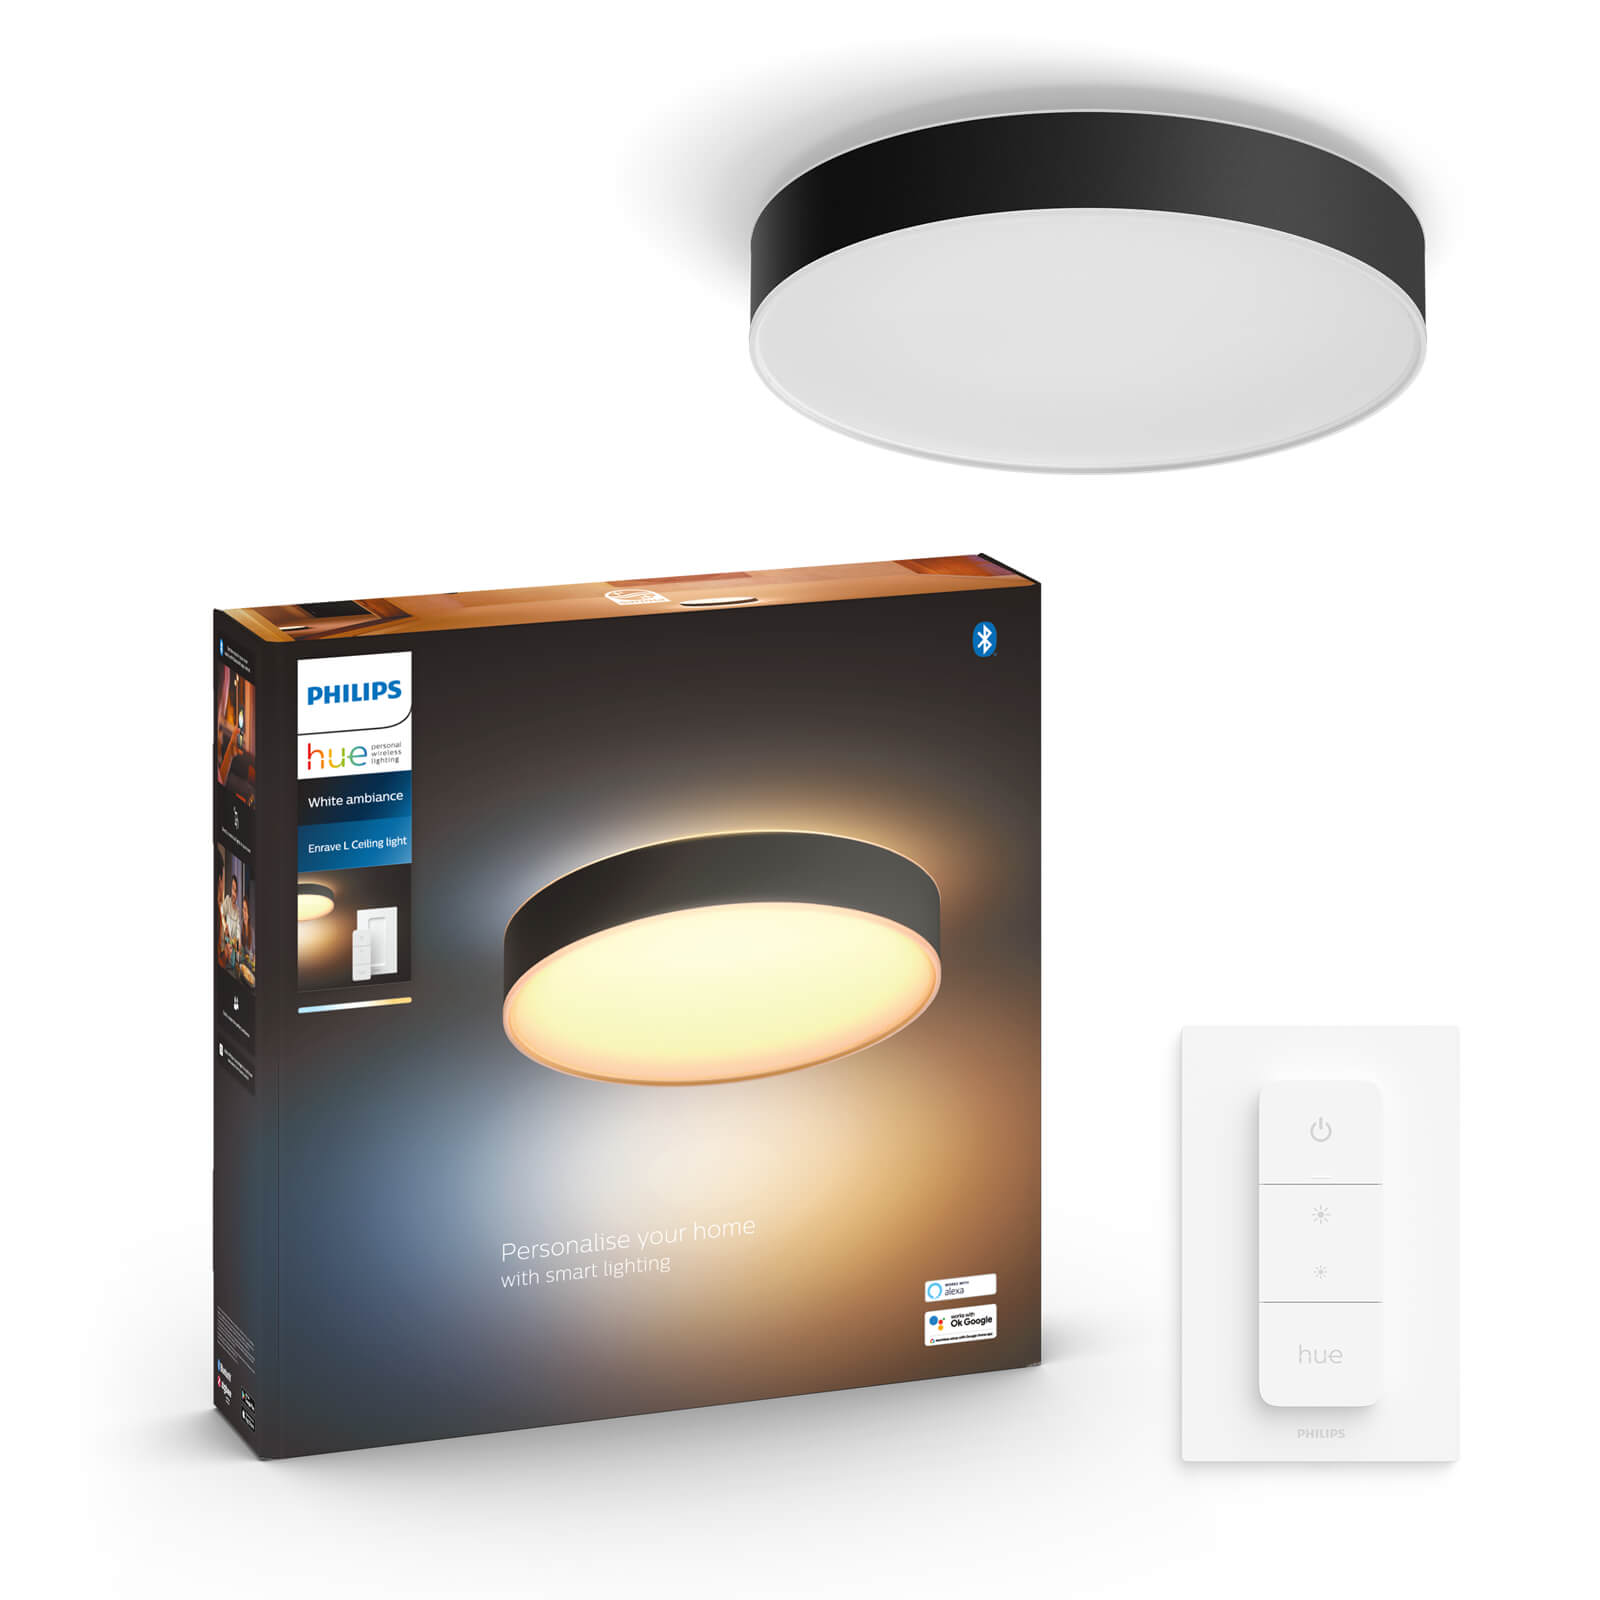 Philips Hue Enrave plafondlamp - White Ambiance - zwart maat L (incl. Dimswitch)